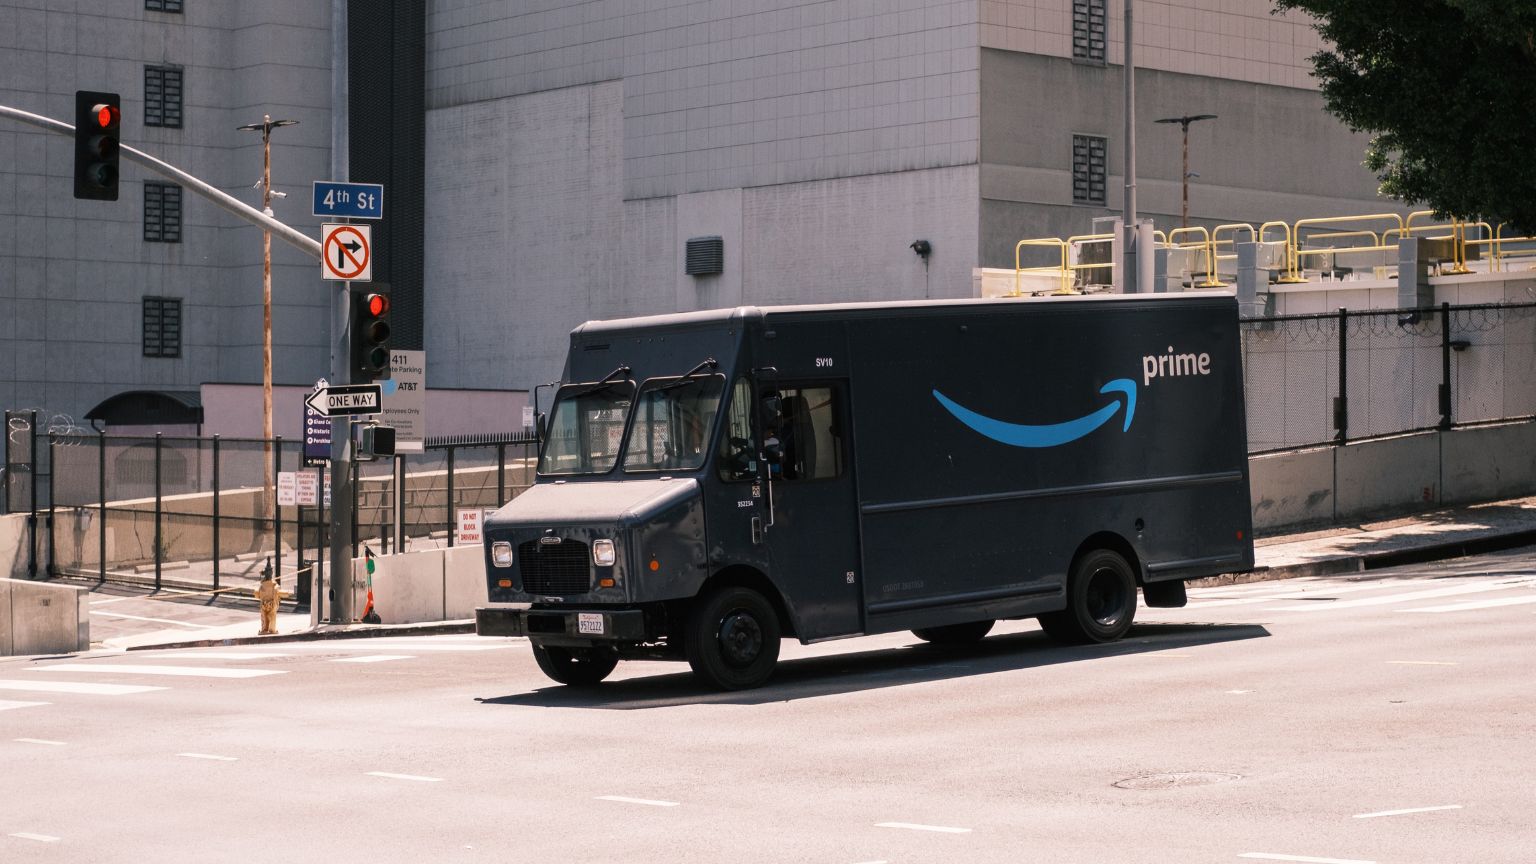 Amazon says it’s in-vehicle surveillance is for employee safety, not to spy on them